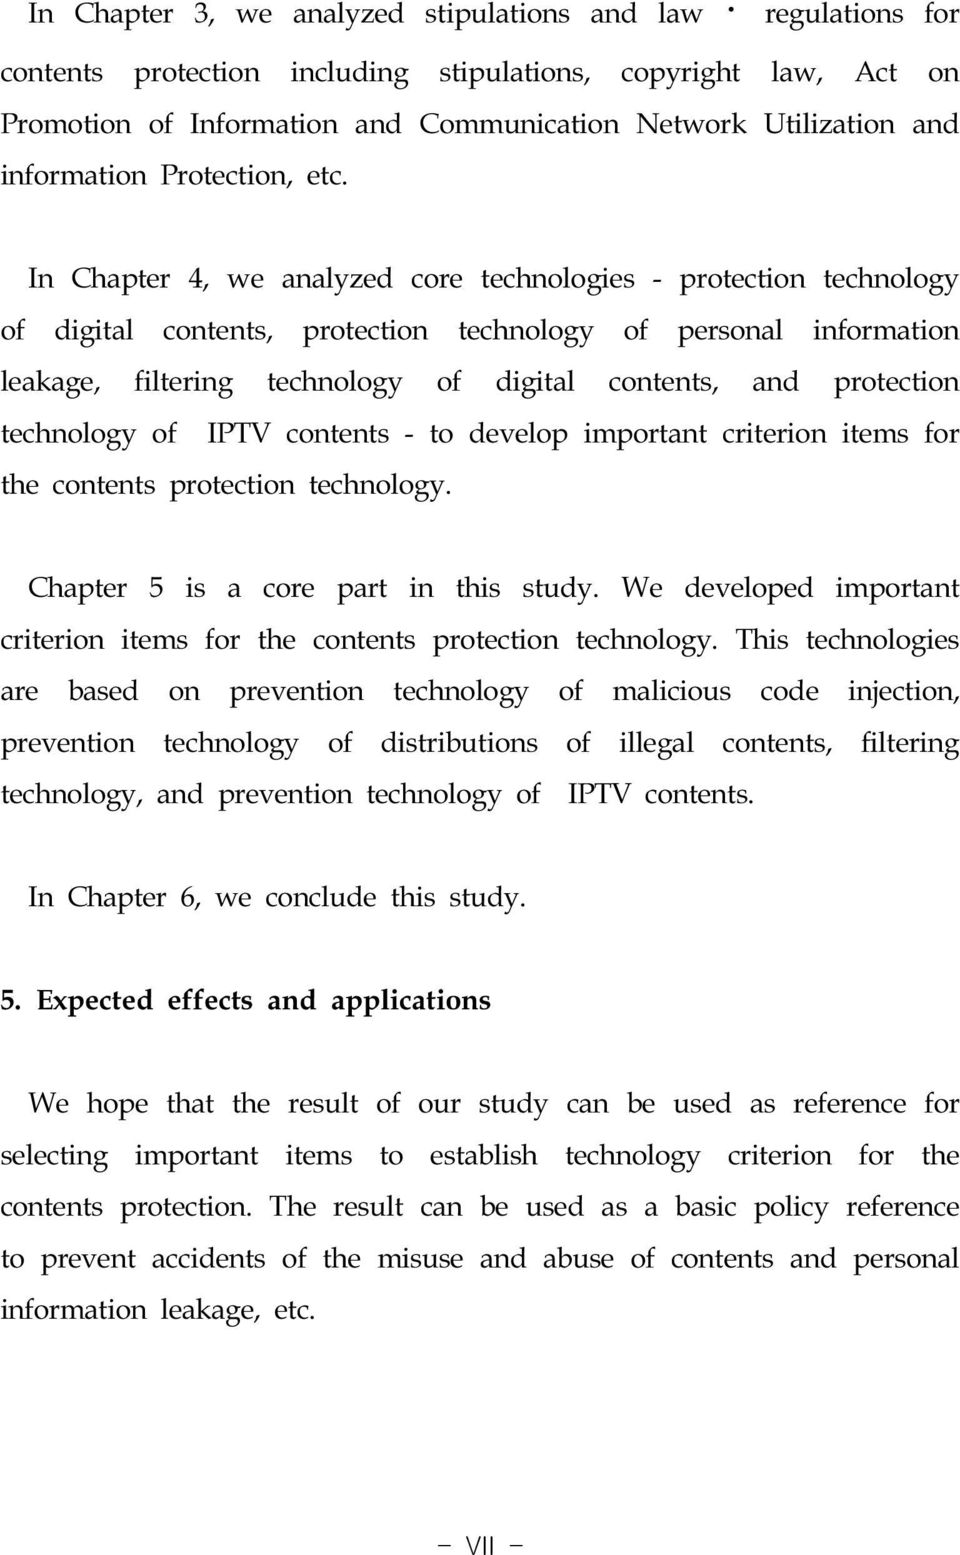 In Chapter 4, we analyzed core technologies - protection technology of digital contents, protection technology of personal information leakage, filtering technology of digital contents, and